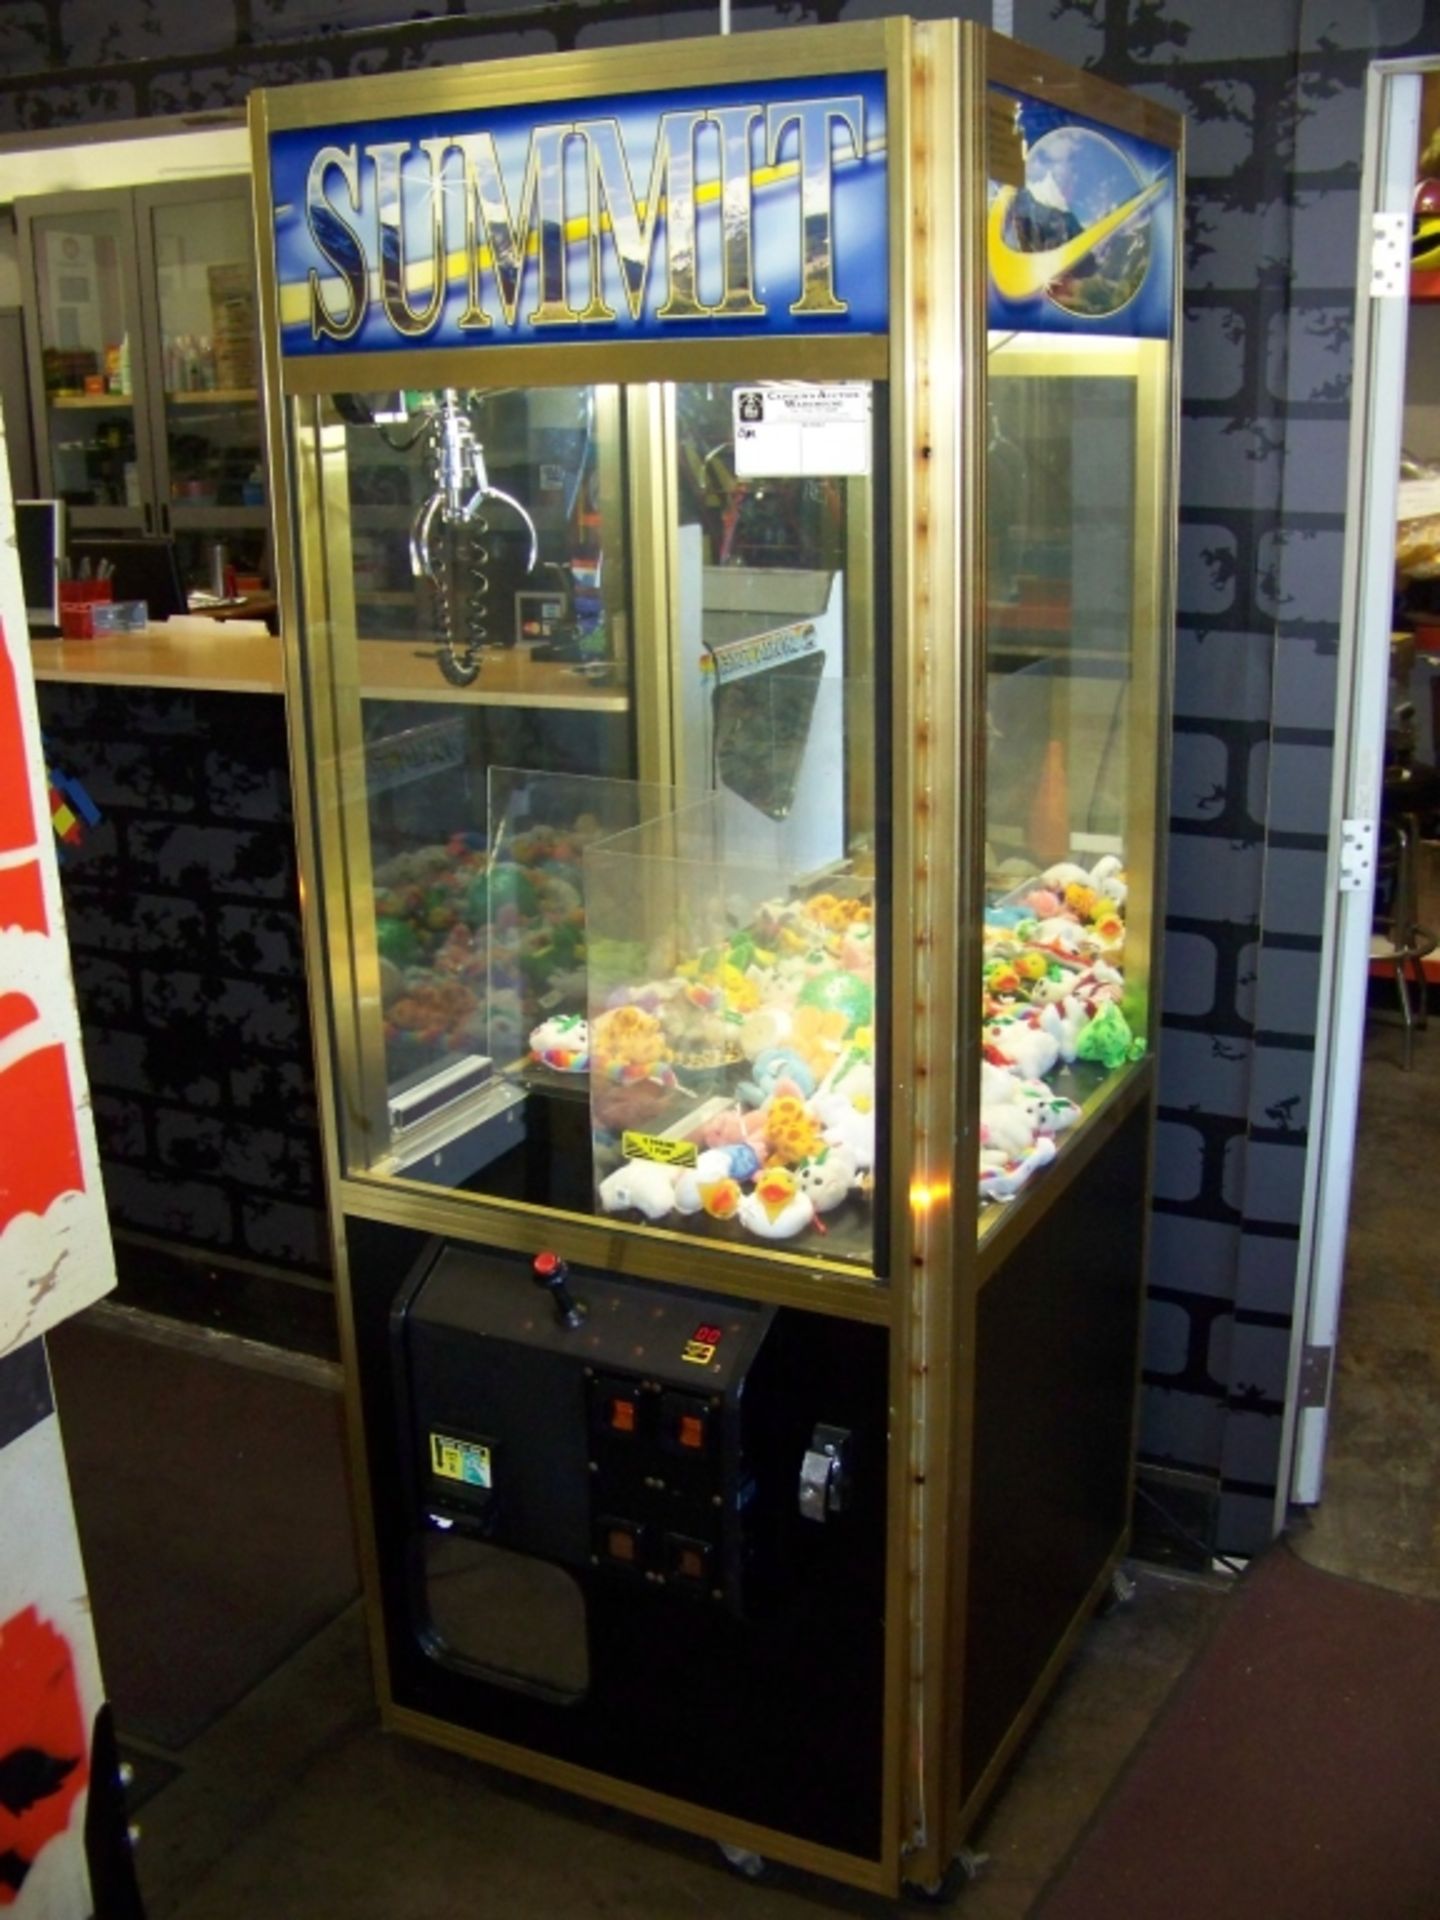 30"" ELAUT SUMMIT PLUSH CLAW CRANE MACHINE Item is in used condition. Evidence of wear and